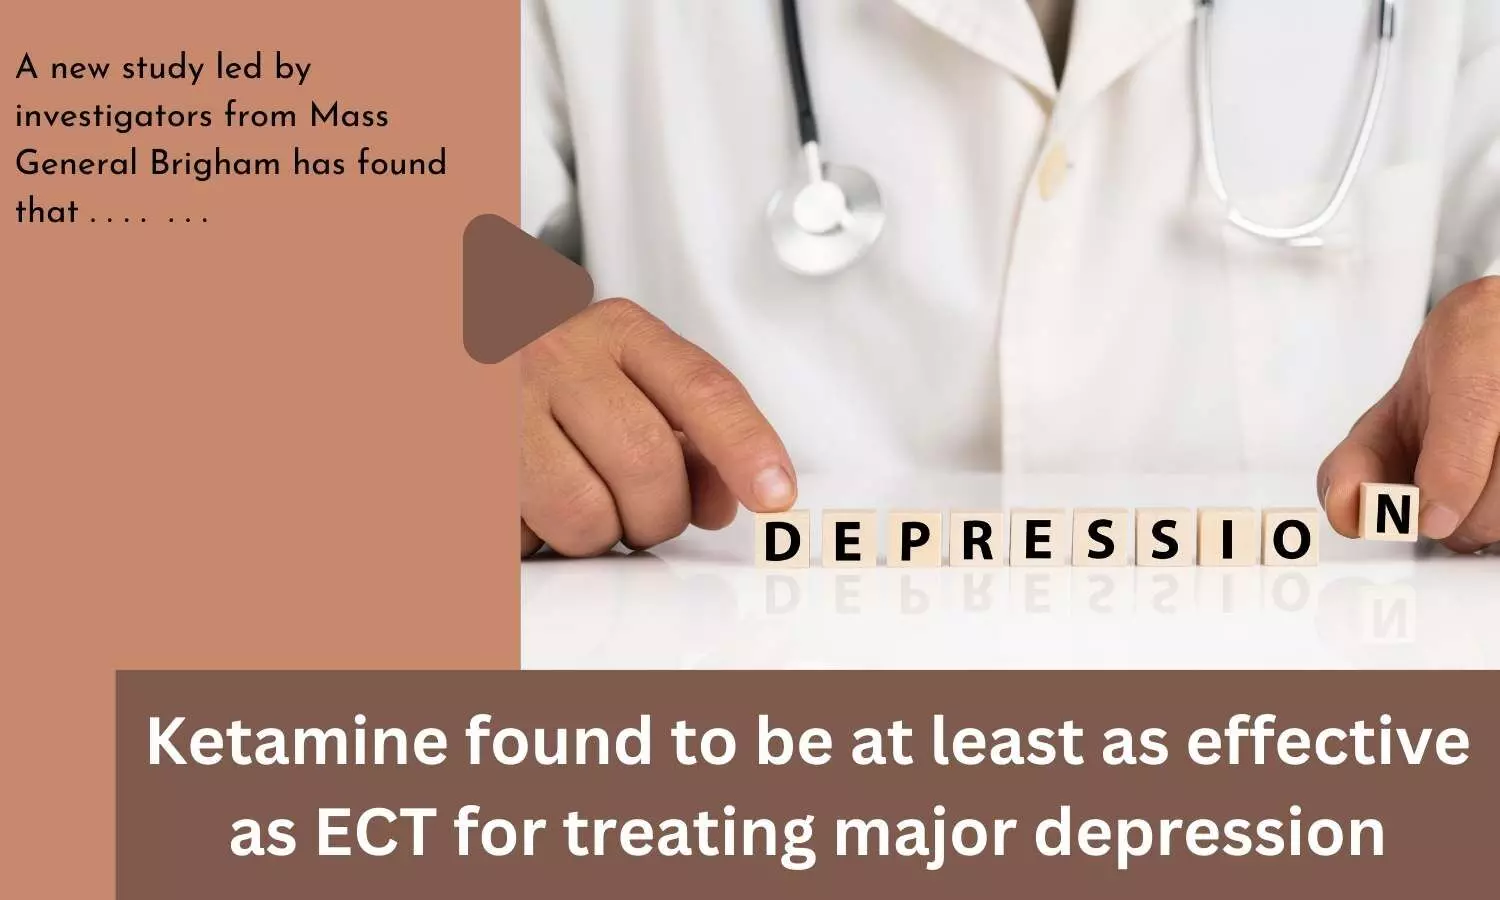 Ketamine found to be at least as effective as ECT for treating major depression